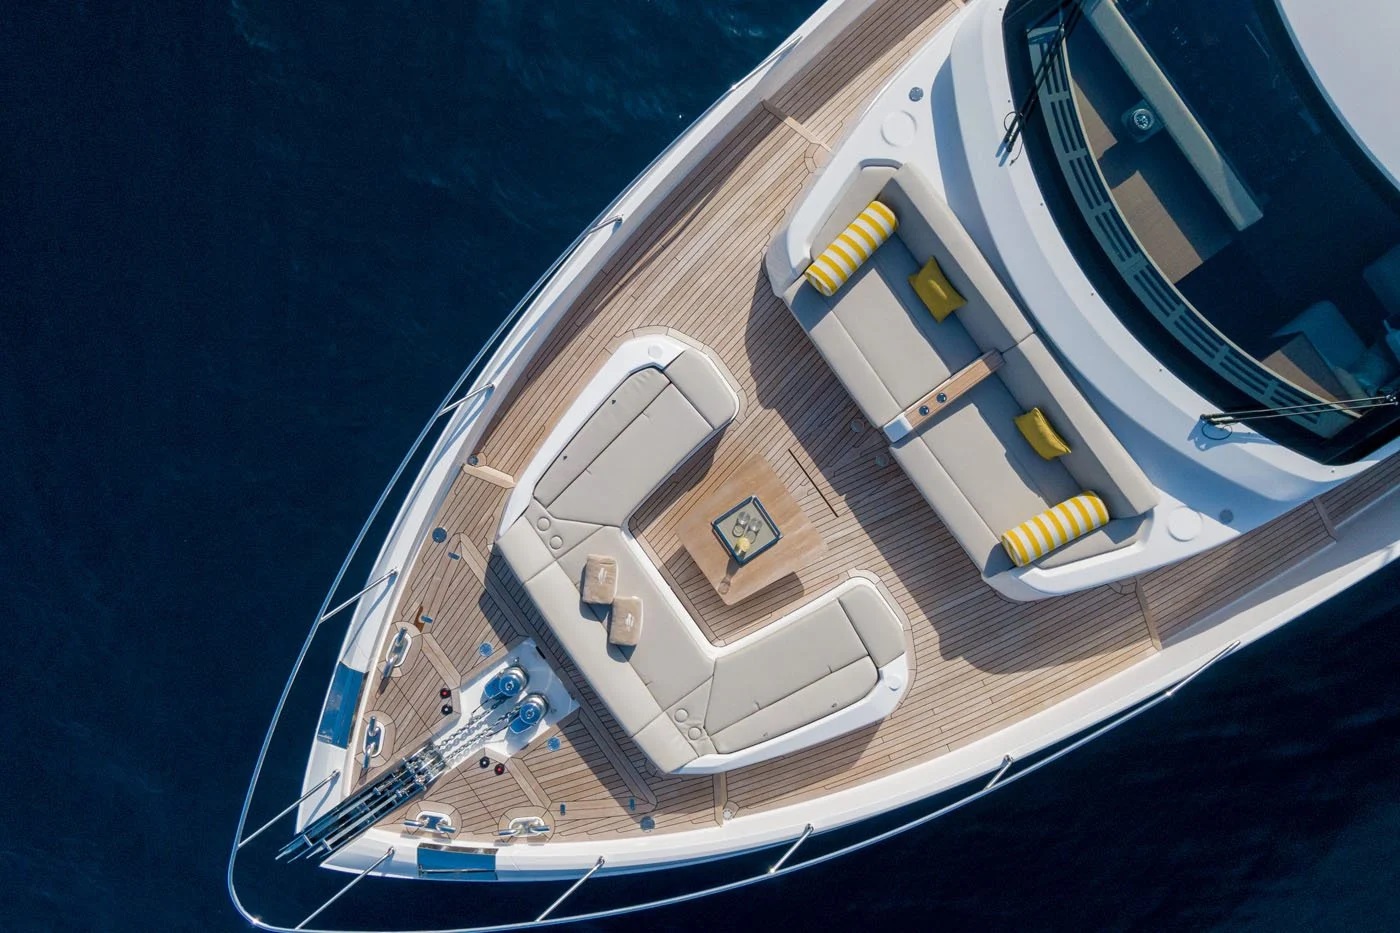 Foredeck lounge aerial view